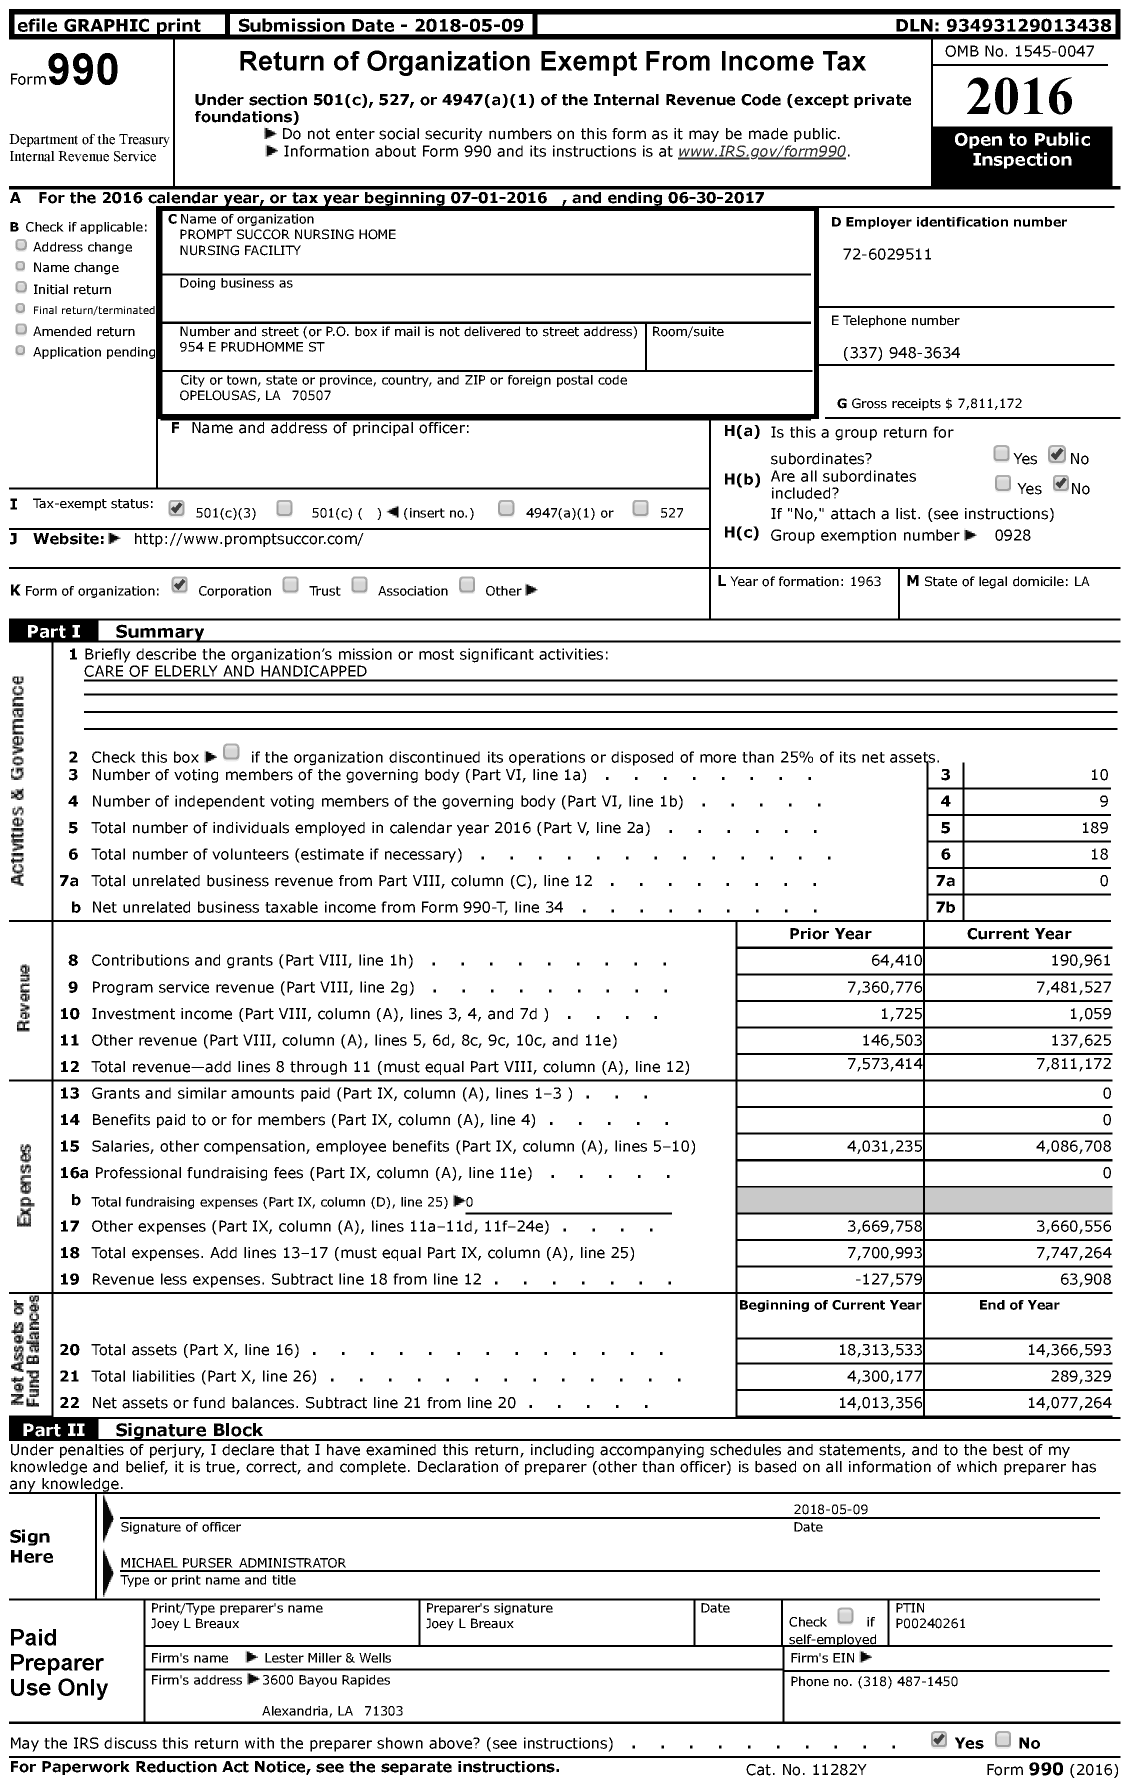 Image of first page of 2016 Form 990 for Prompt Succor Nursing Home Nursing Facility